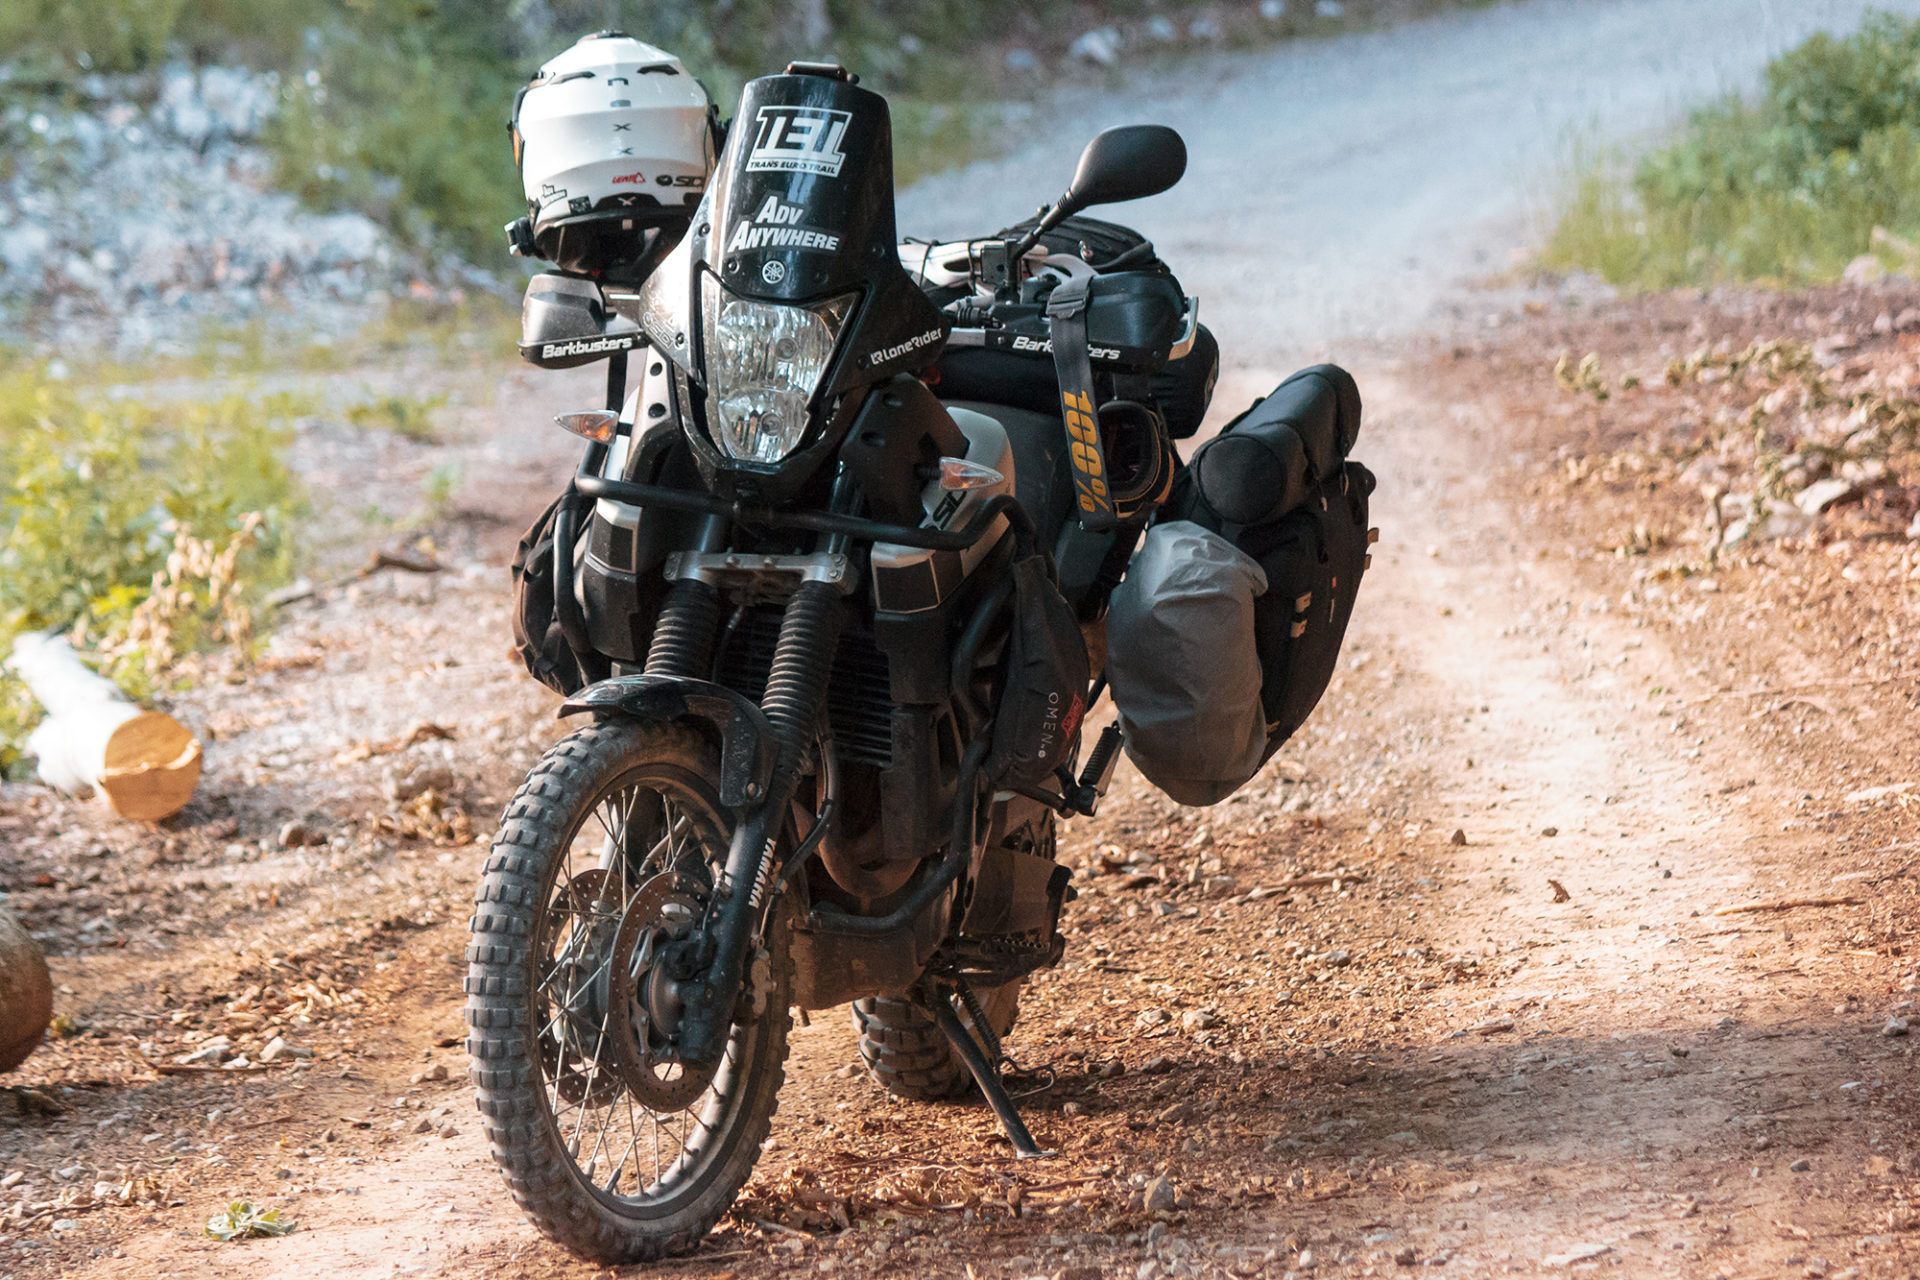 Dual sport motorcycle with luggage